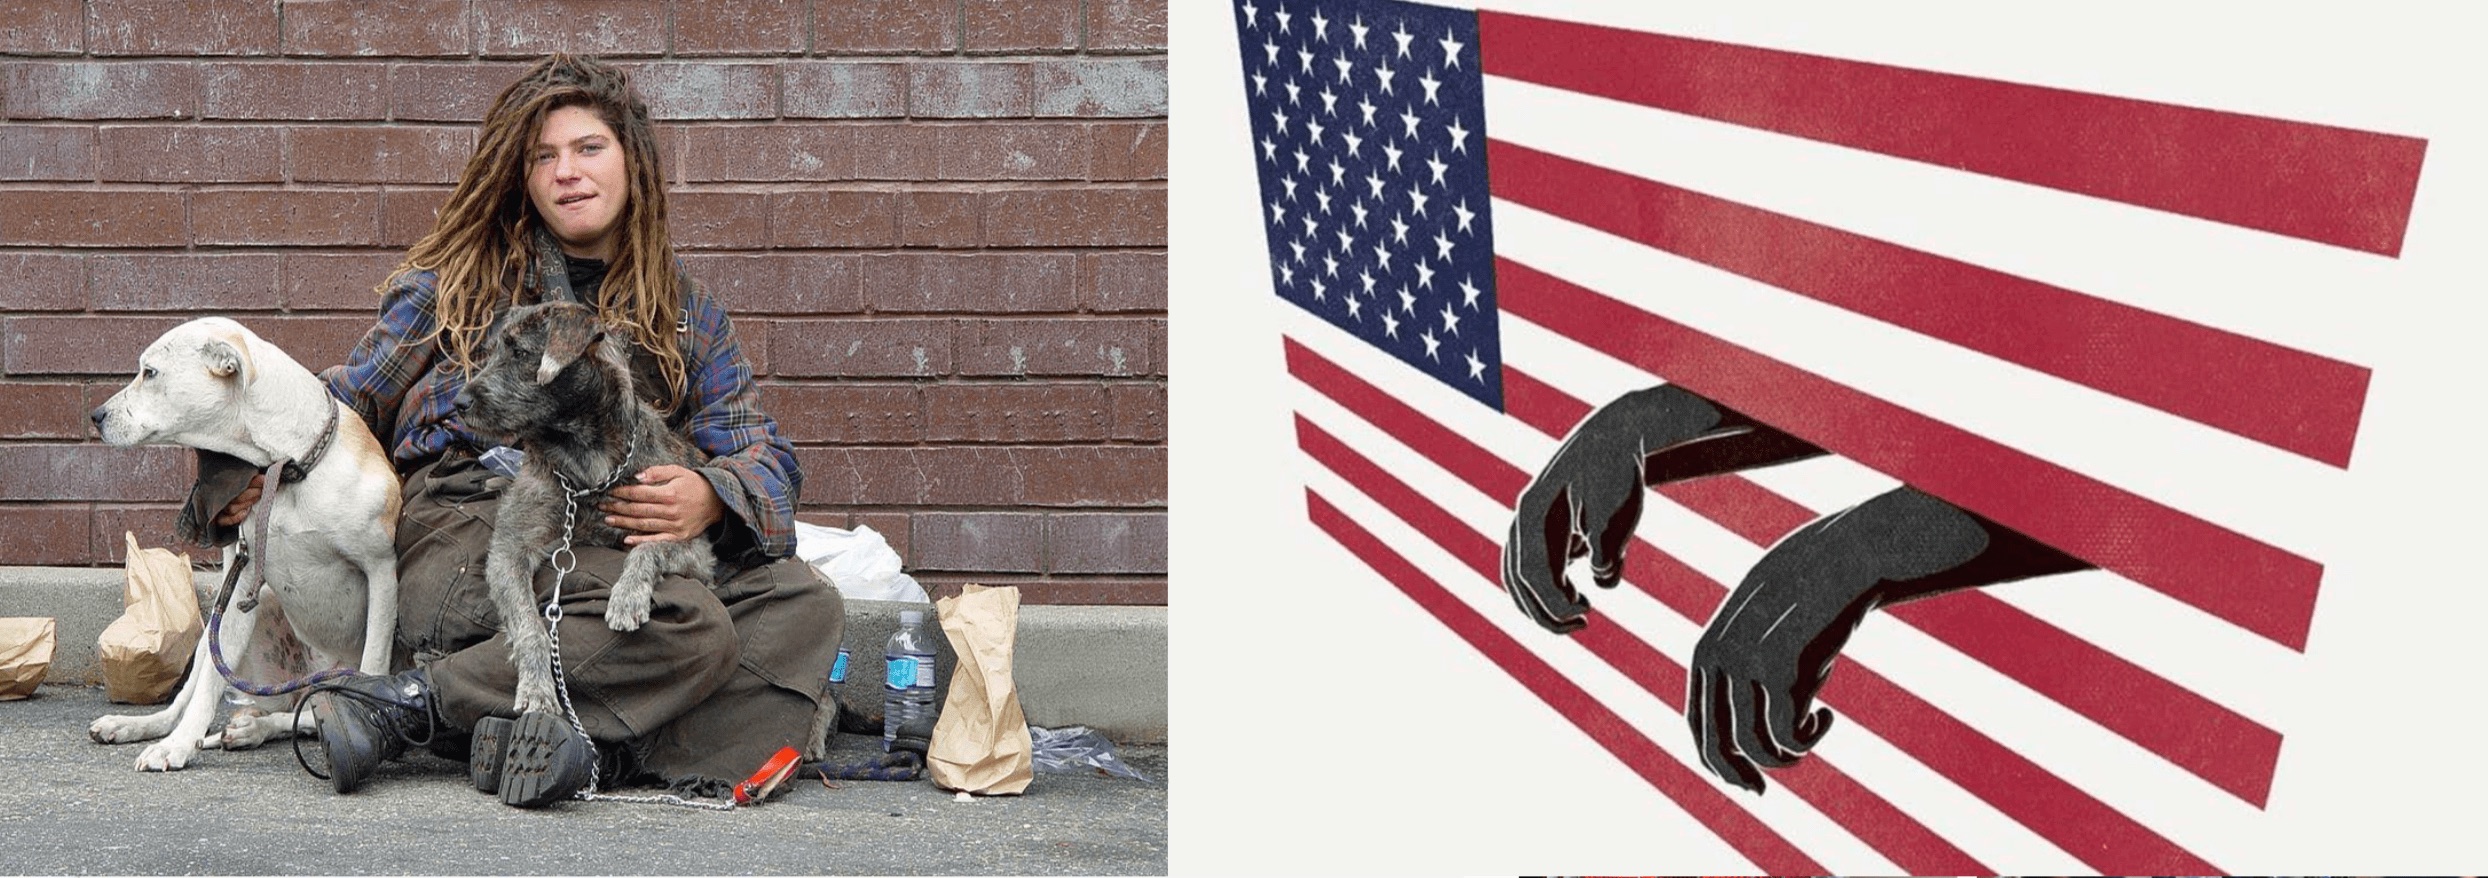 unhoused person with dog, american flag as prison bars with hands hanging out